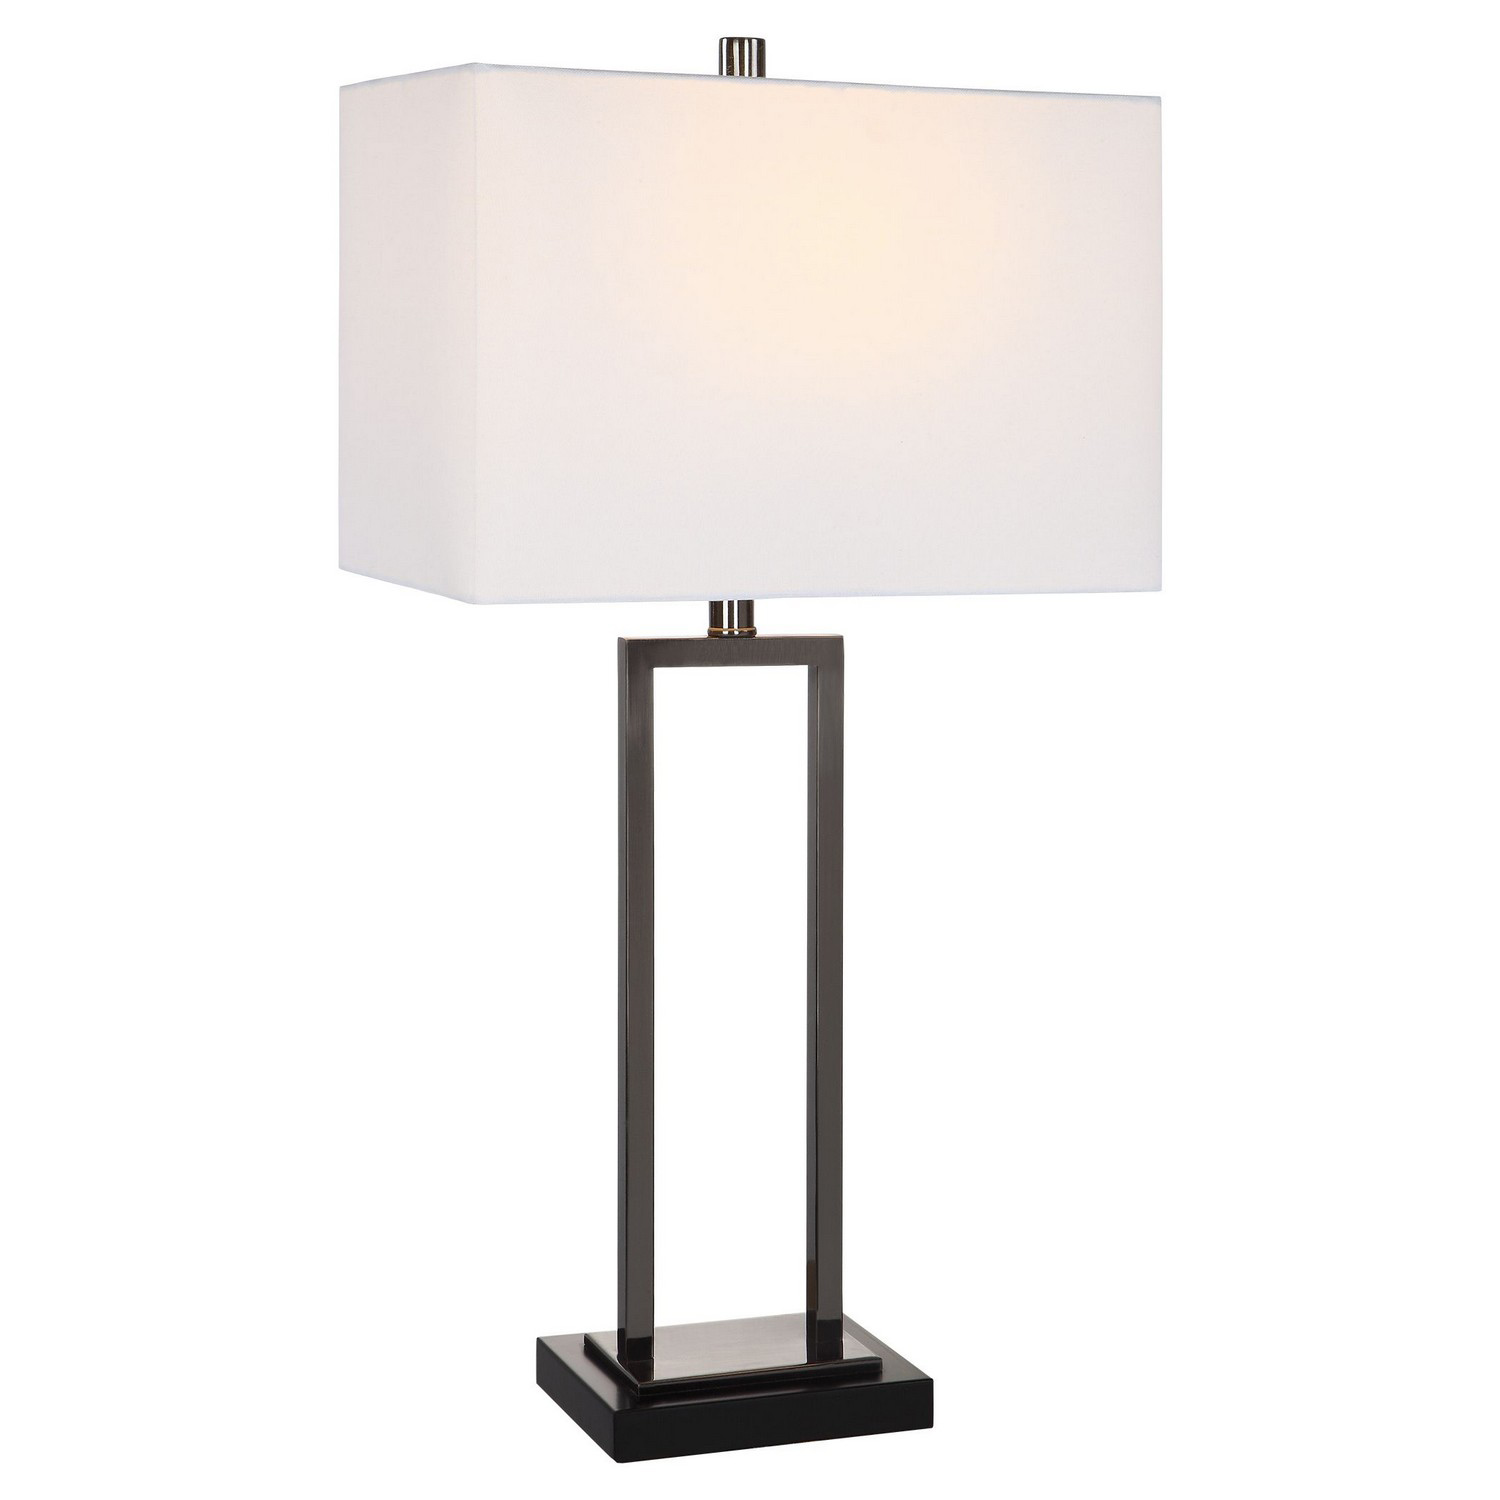 Uttermost W26086-1 Table Lamp - Black/Brushed Nickel